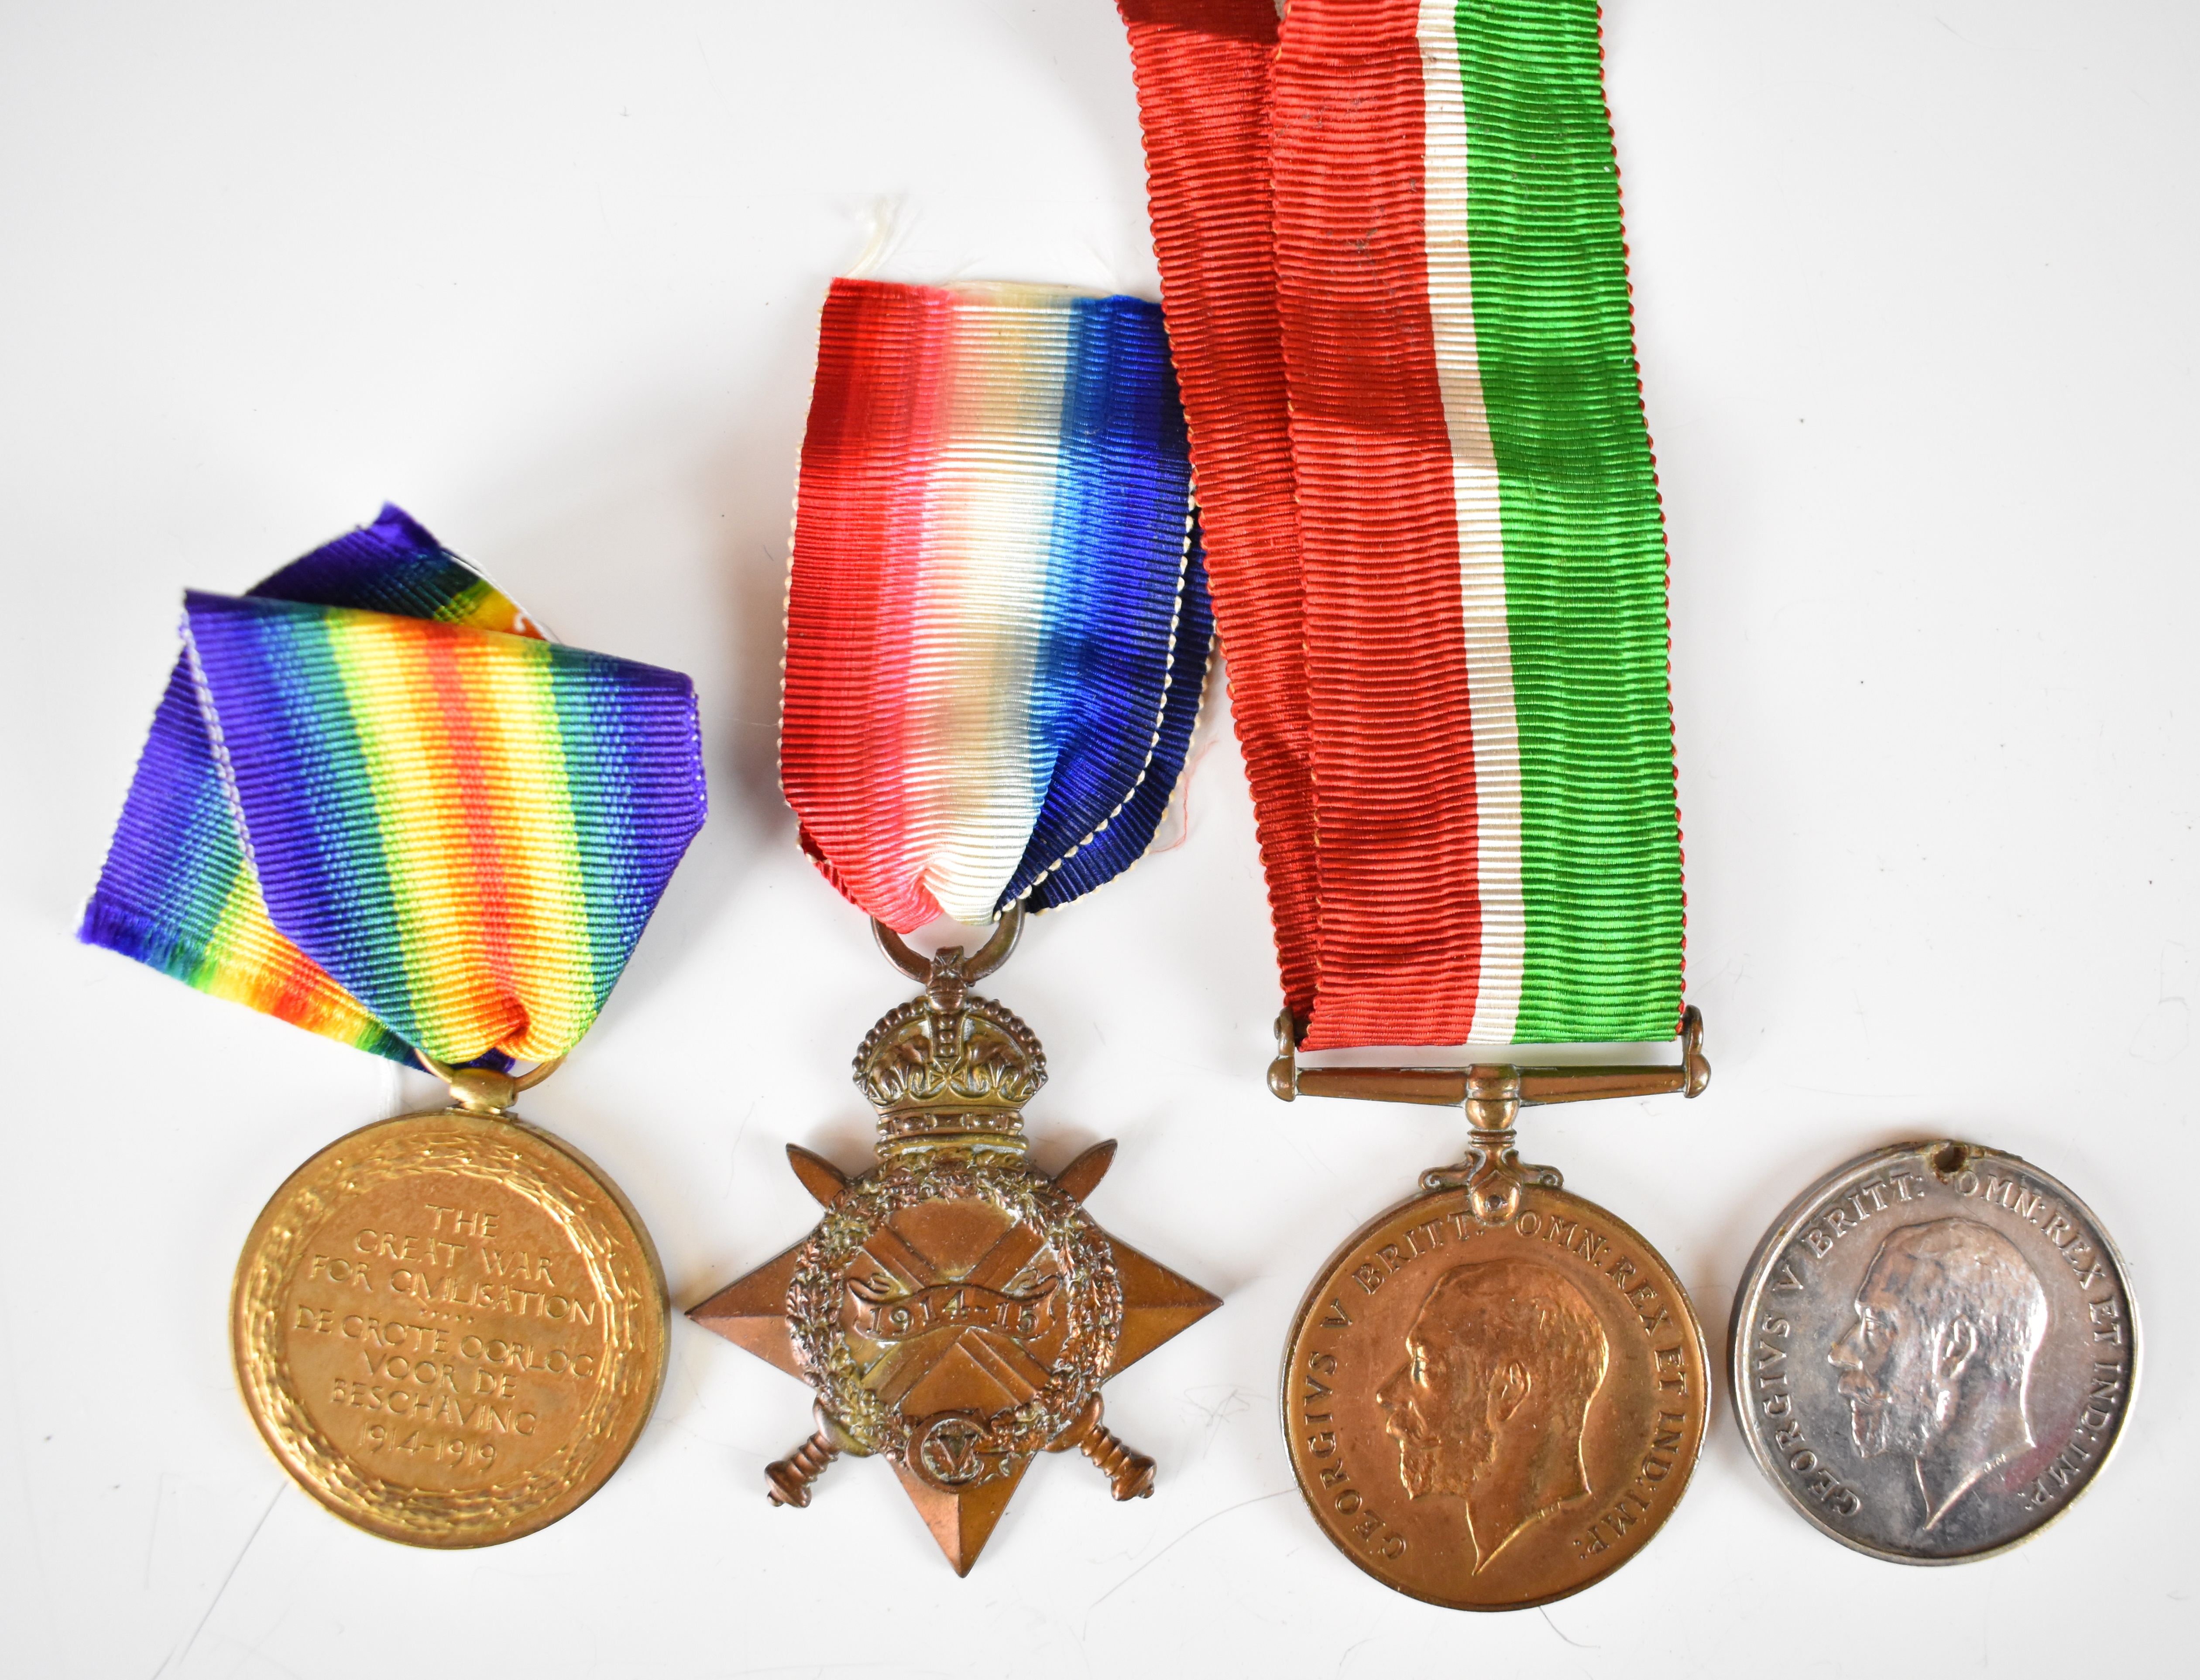 Four WW1 medals comprising War Medal and Mercantile Marine Medal named to Daniel Jones, 1914/1915